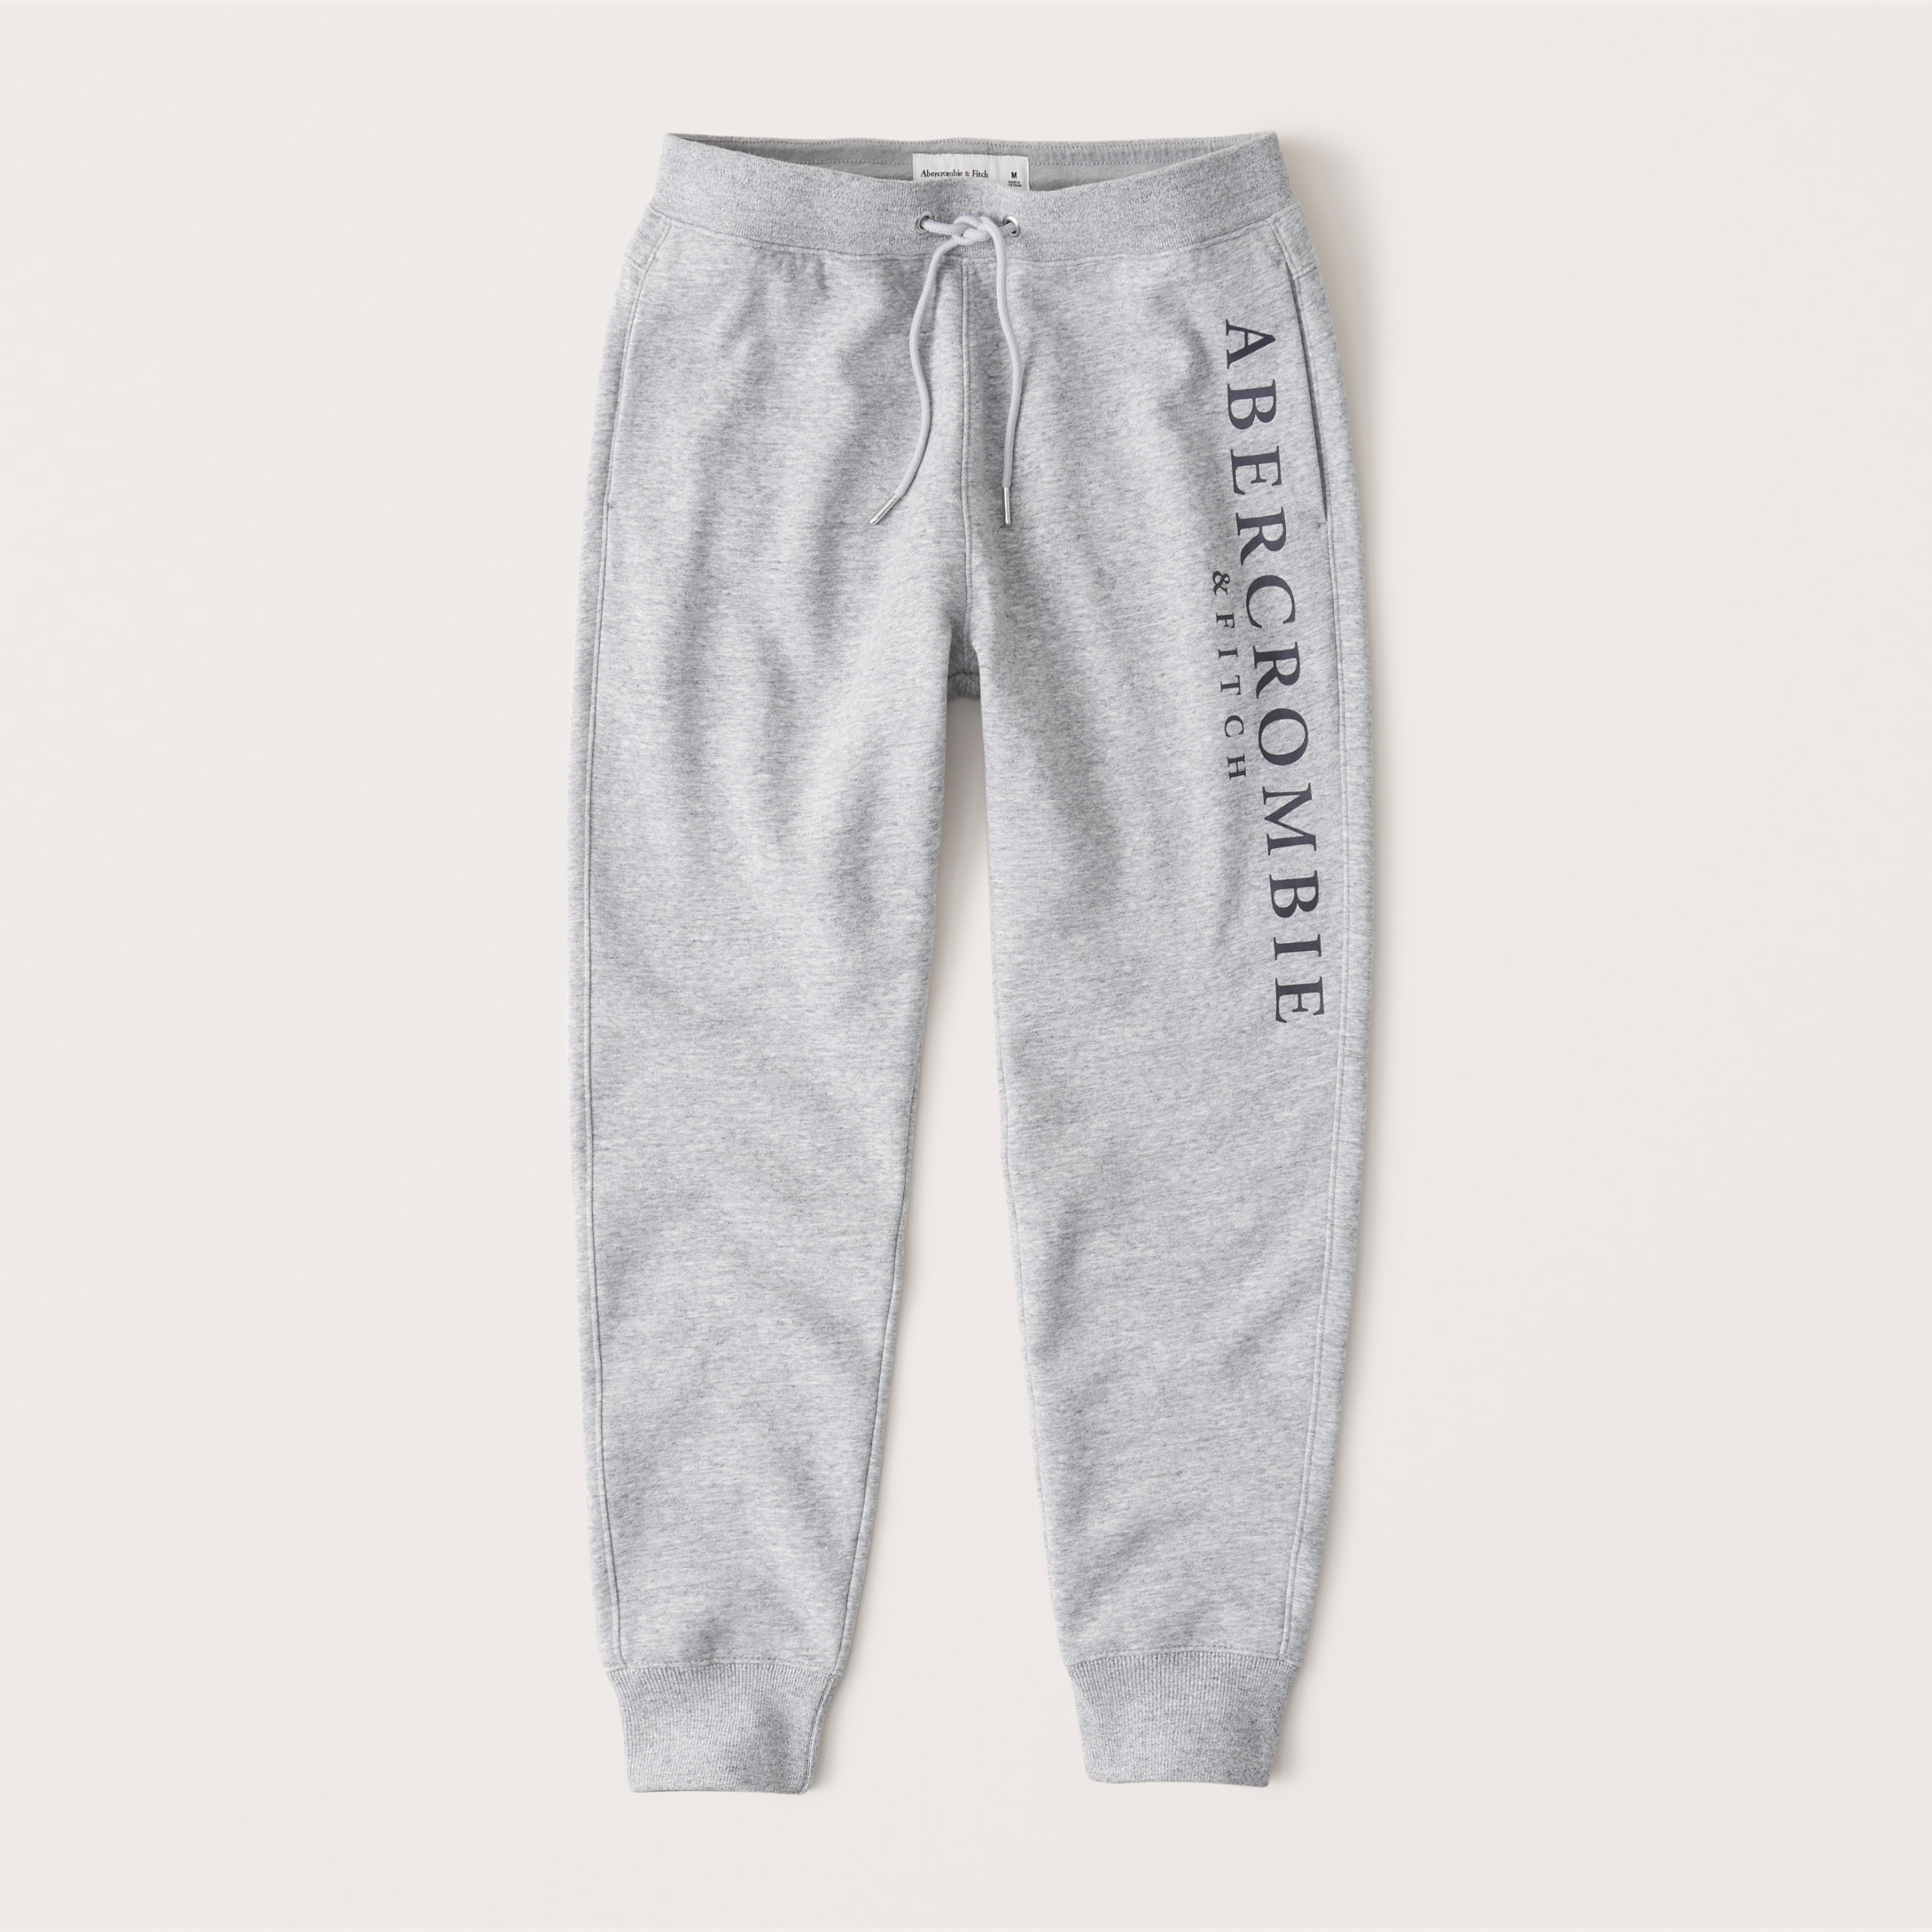 abercrombie and fitch pants price